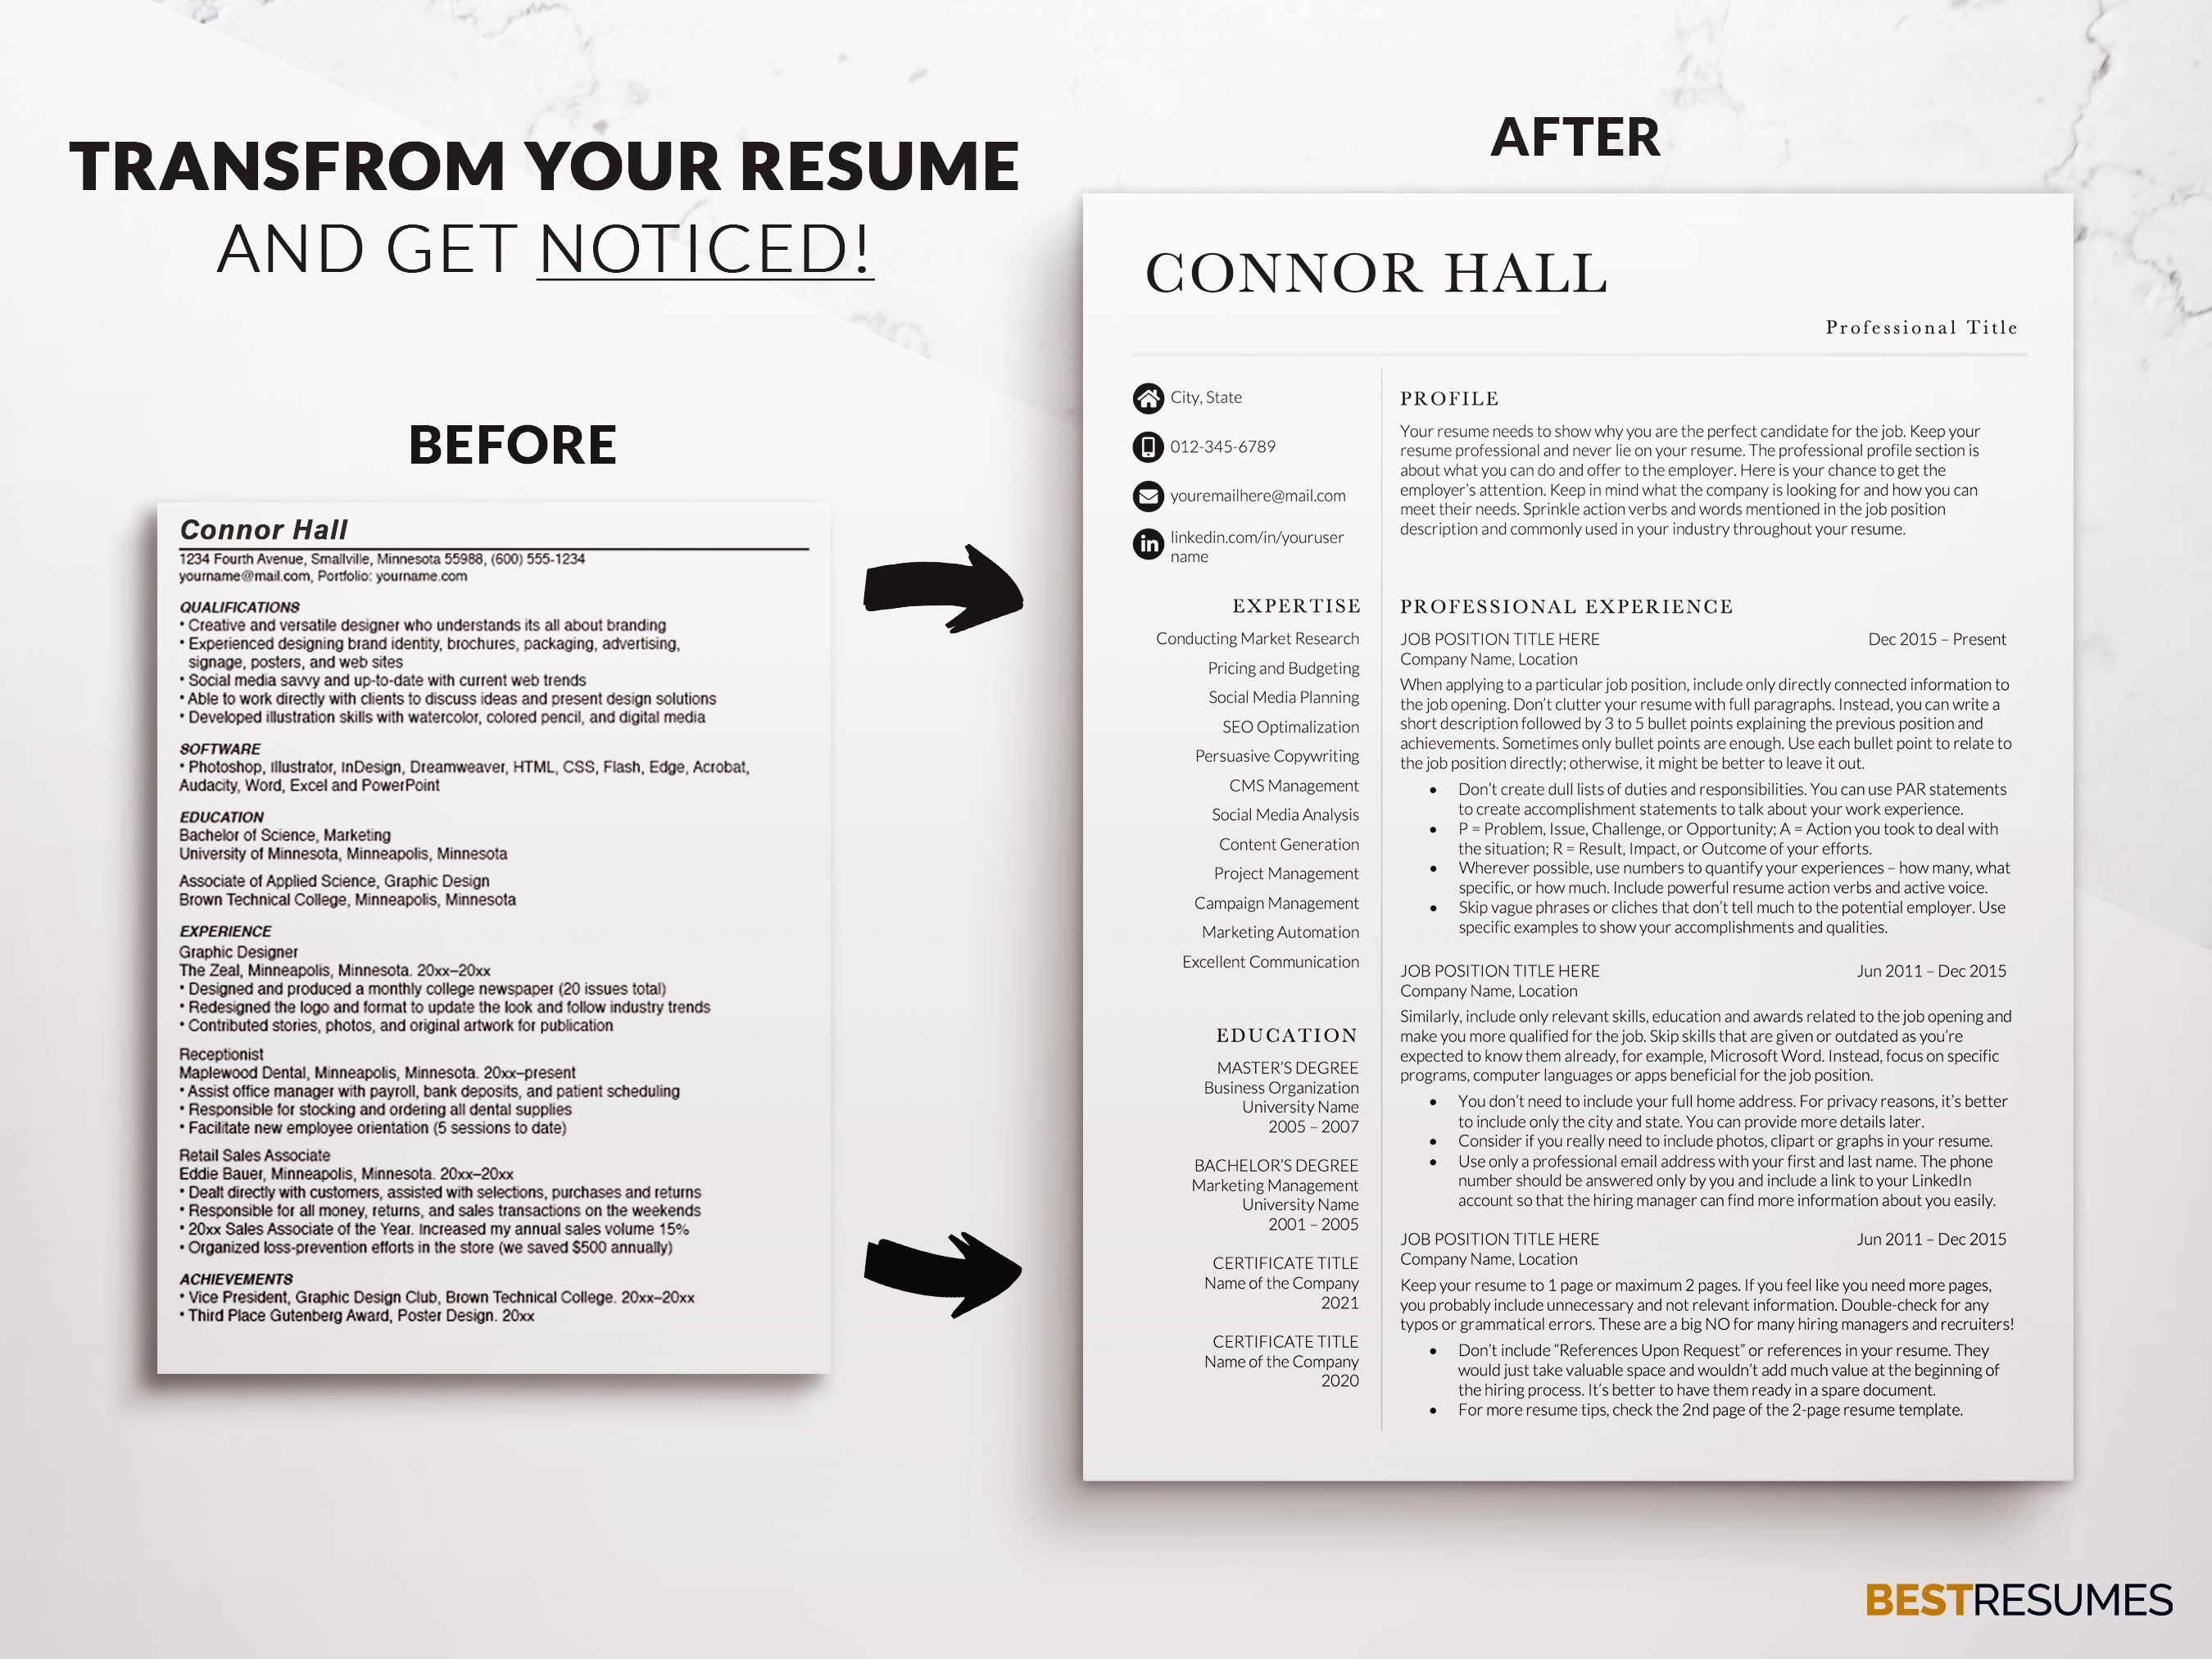 professional resume page transform your resume connor hall 776